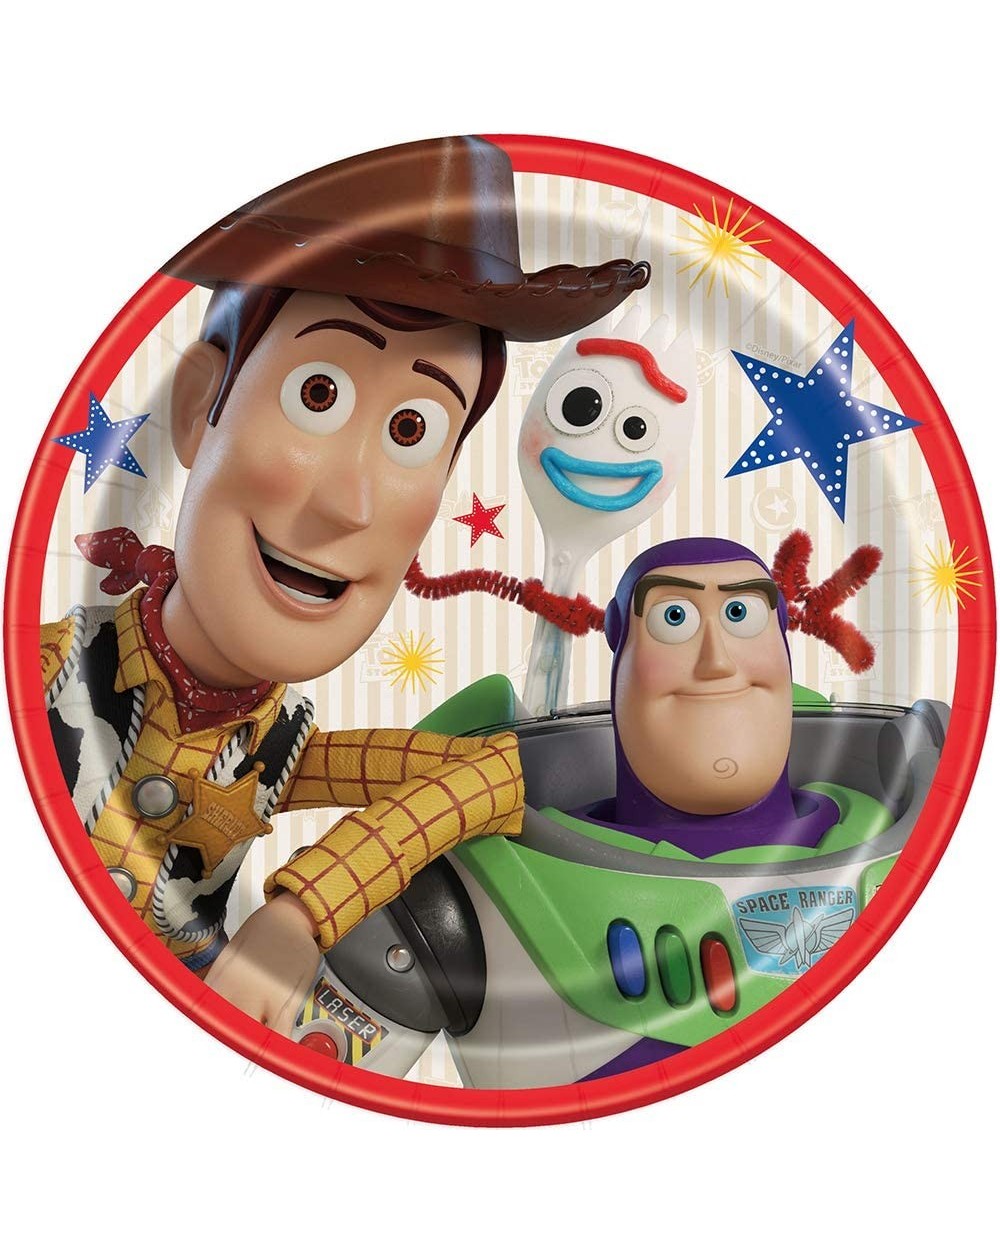 Party Tableware Disney Toy Story 4 Movie 9 Inch Round Plates (8 Per Package) - CP18SZ4C5KI $8.37